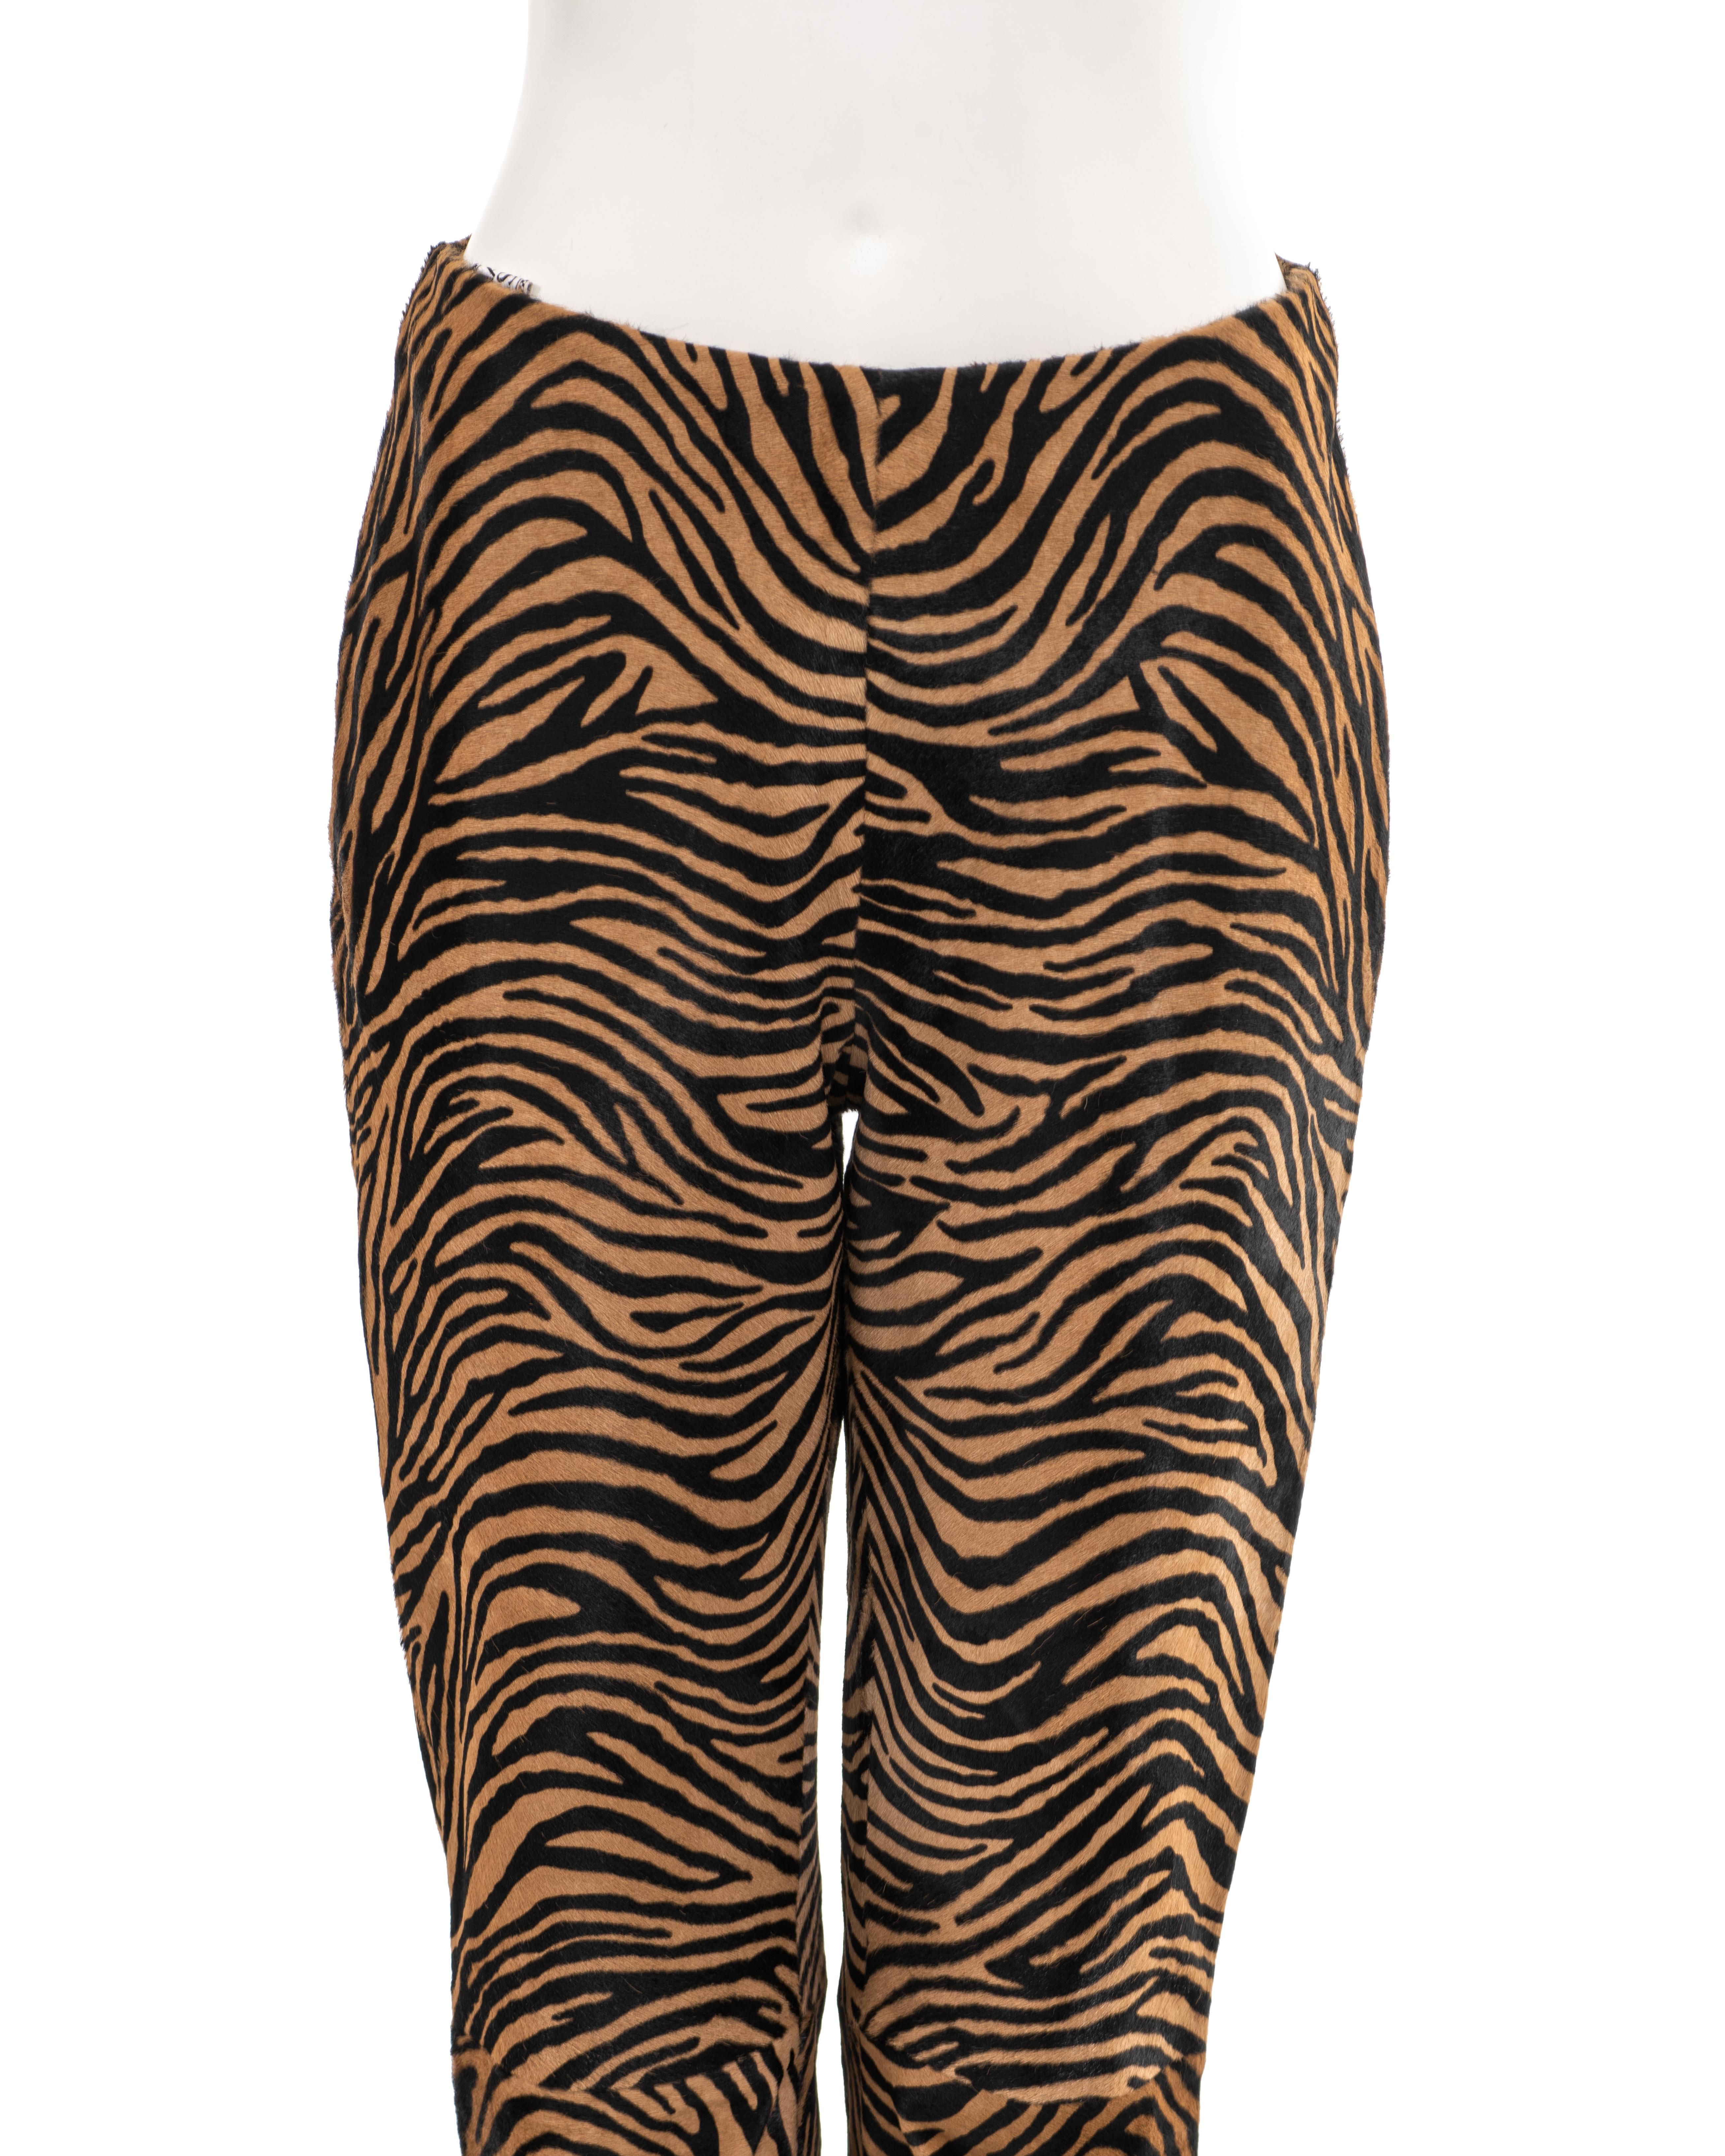 Gianni Versace tiger-print pony hair leather pants, fw 1999 For Sale 2